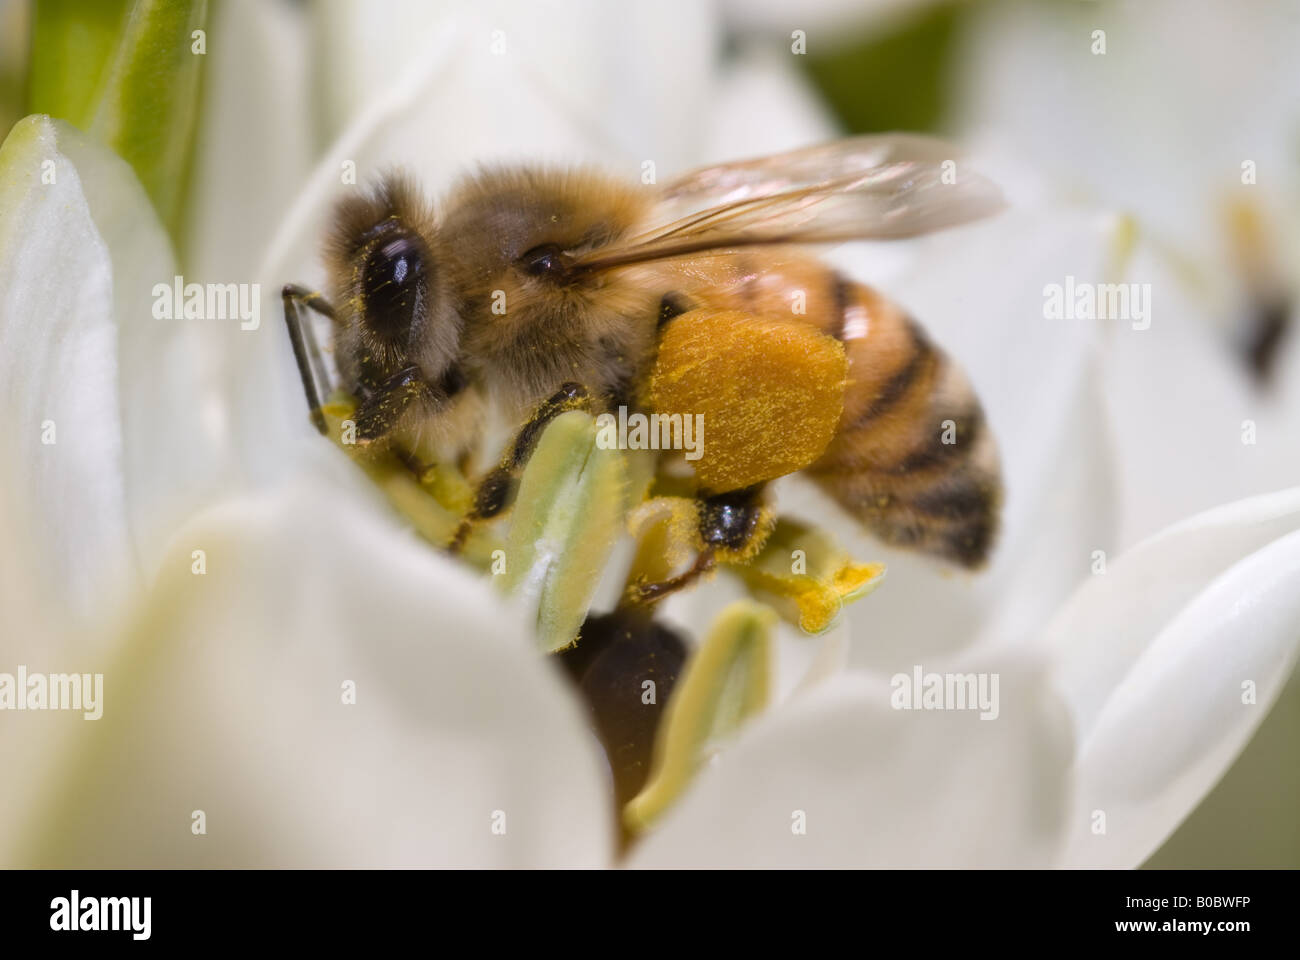 A honey bee on a white flower during a sunny spring day Stock Photo